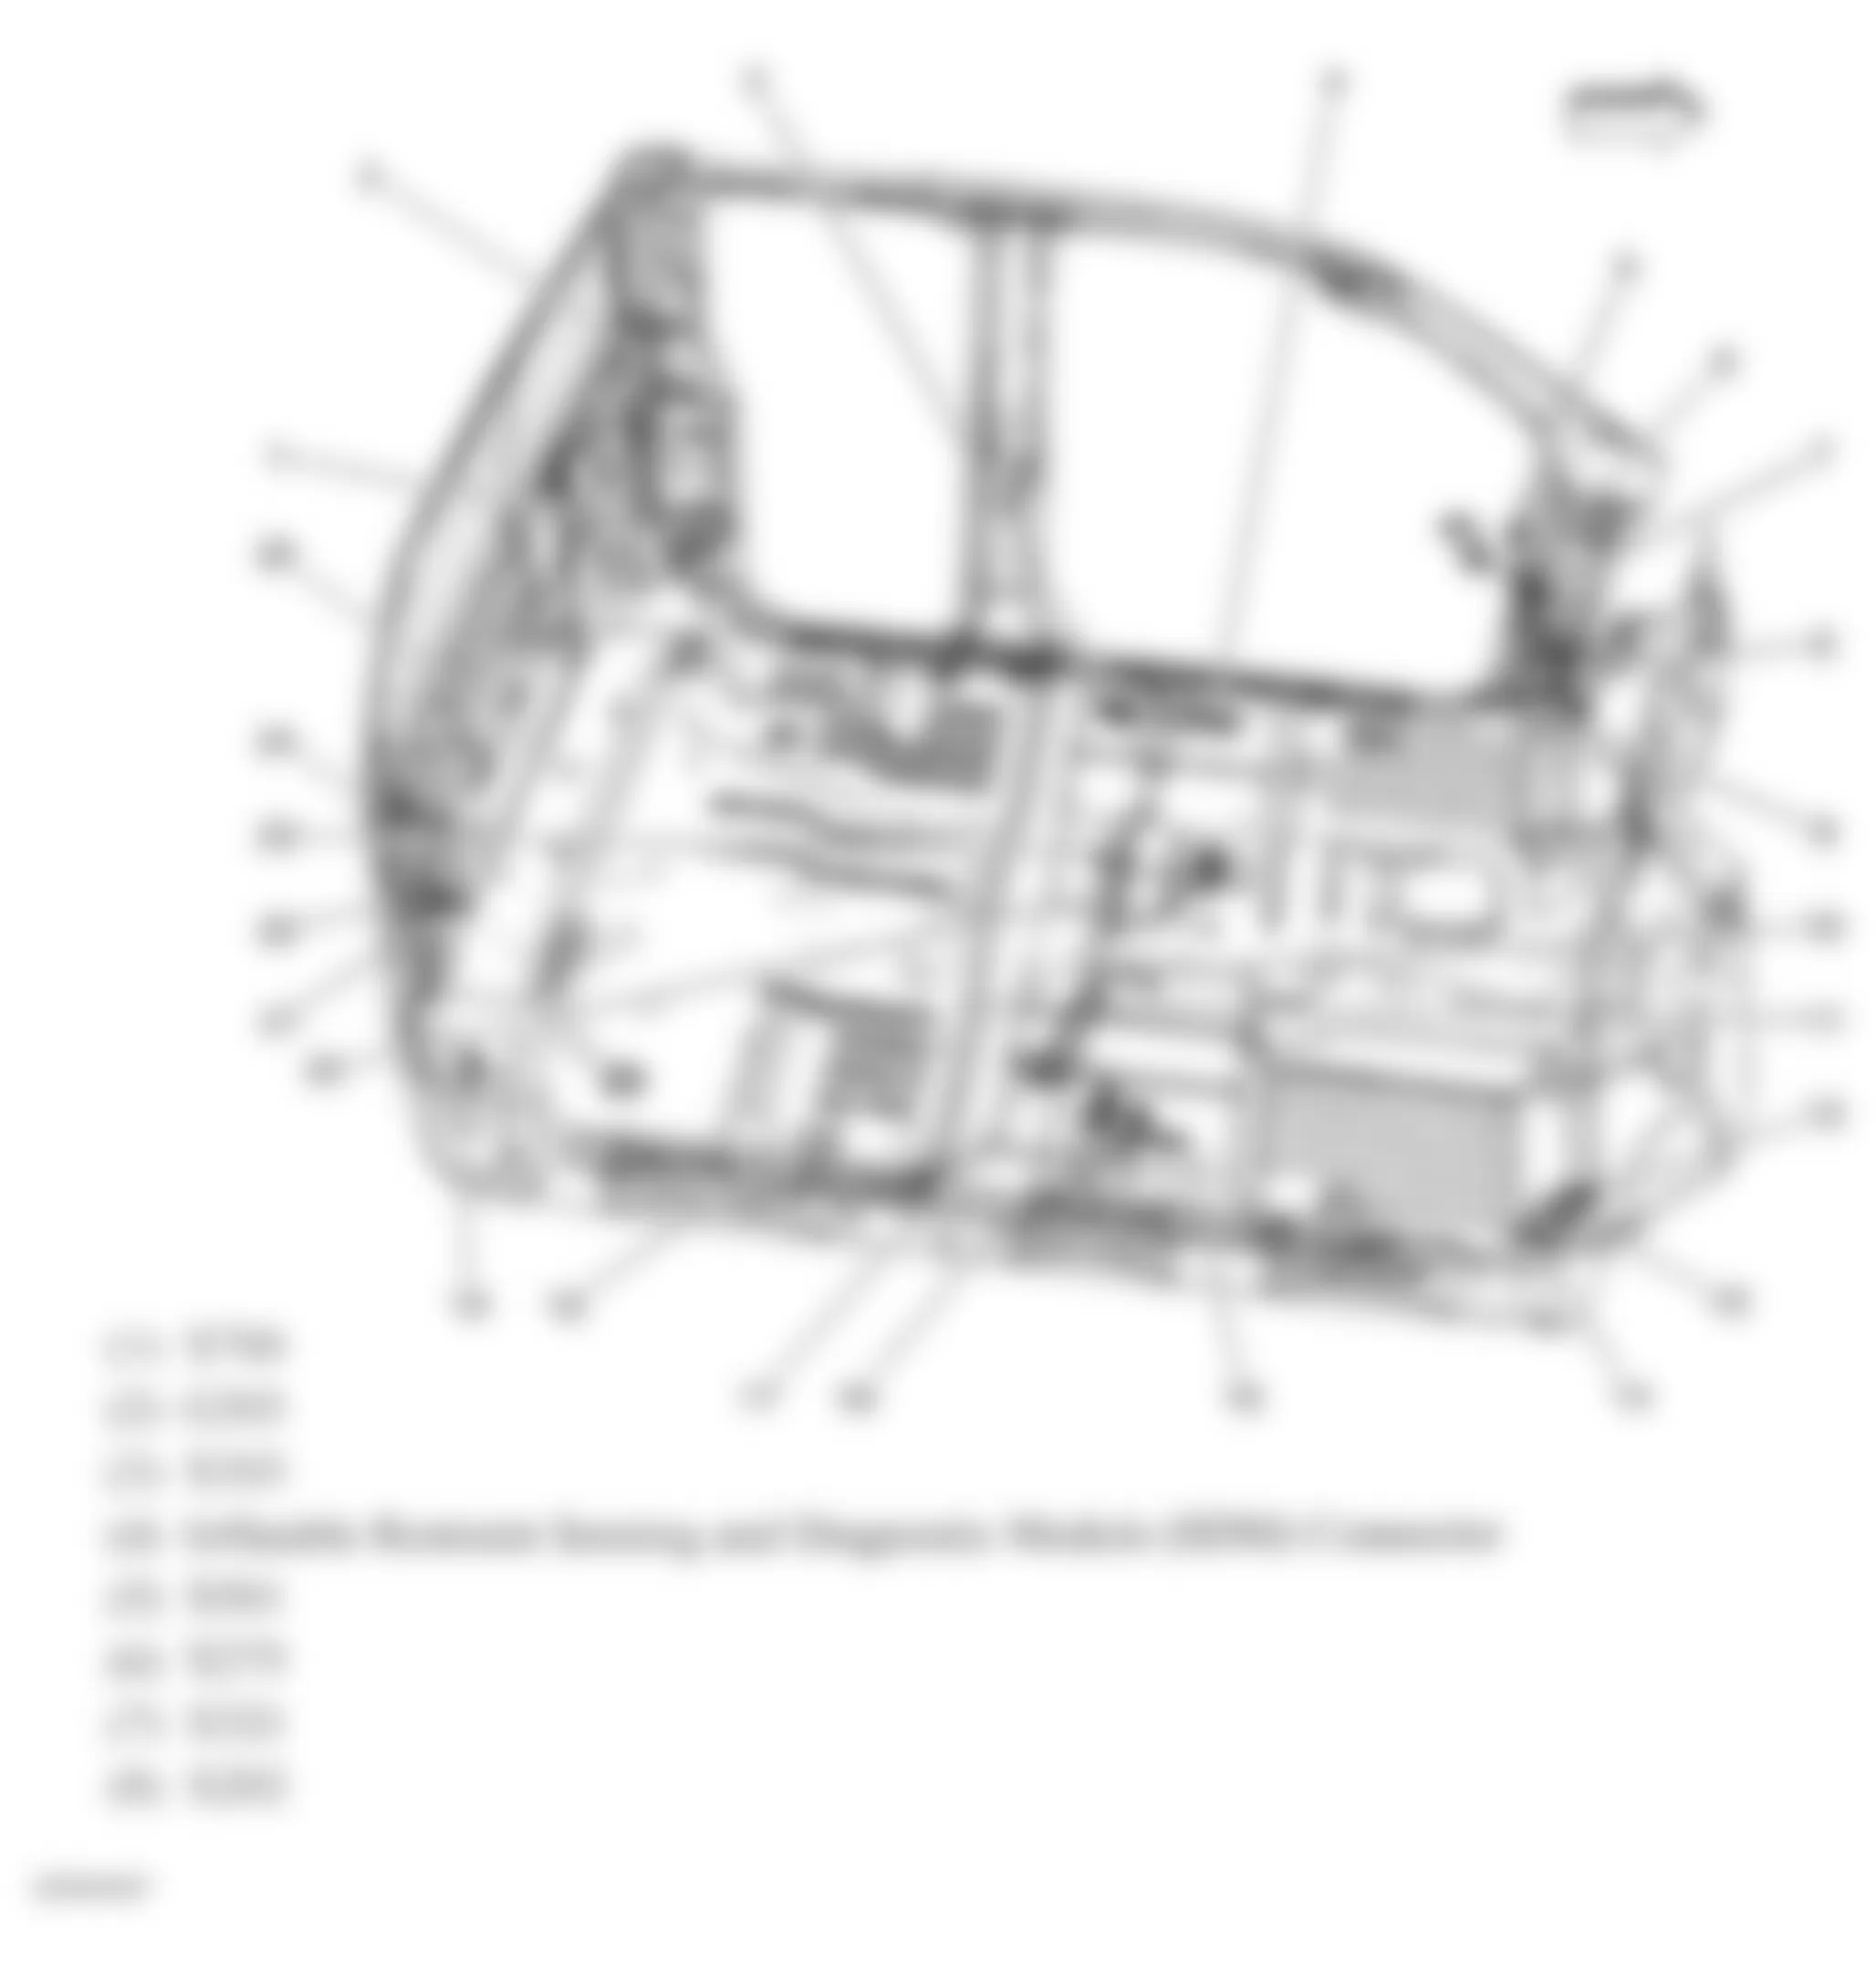 GMC Sierra 3500 HD 2007 - Component Locations -  Passenger Compartment (Extended Cab) (1 Of 2)